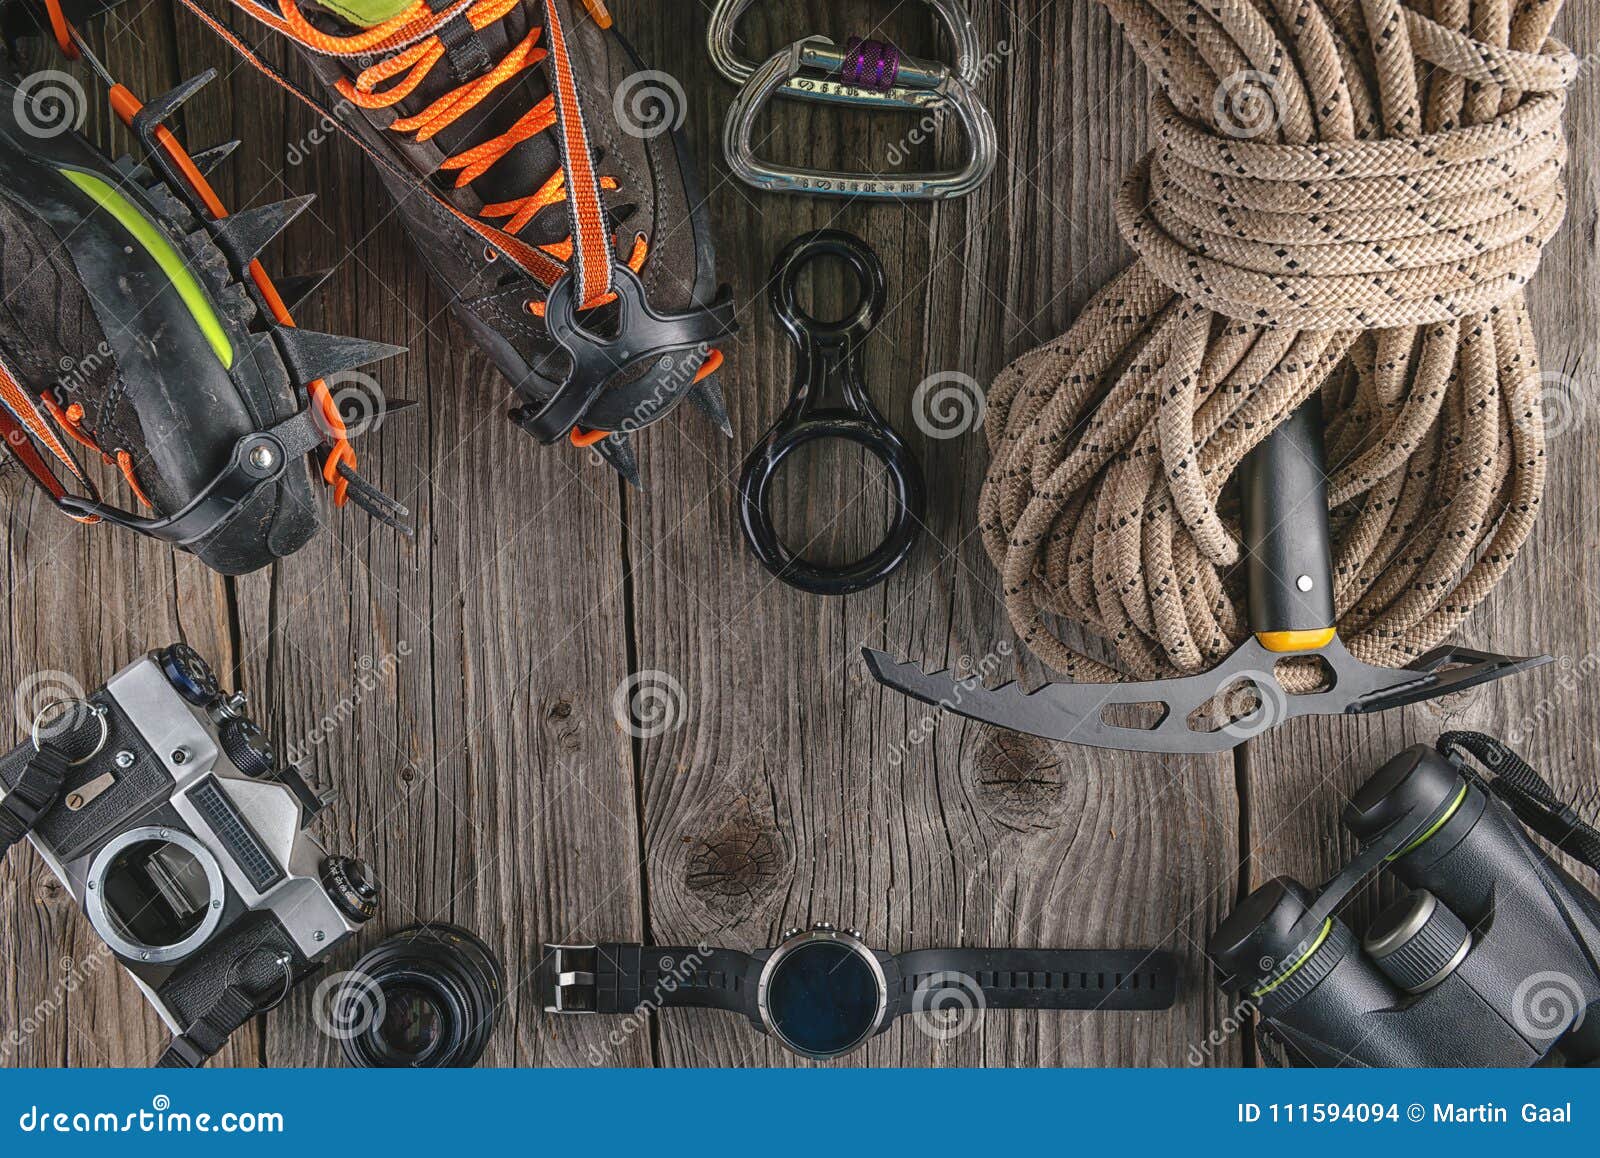 Top View of Rock Climbing Equipment on Wooden Background. Chalk Bag ...